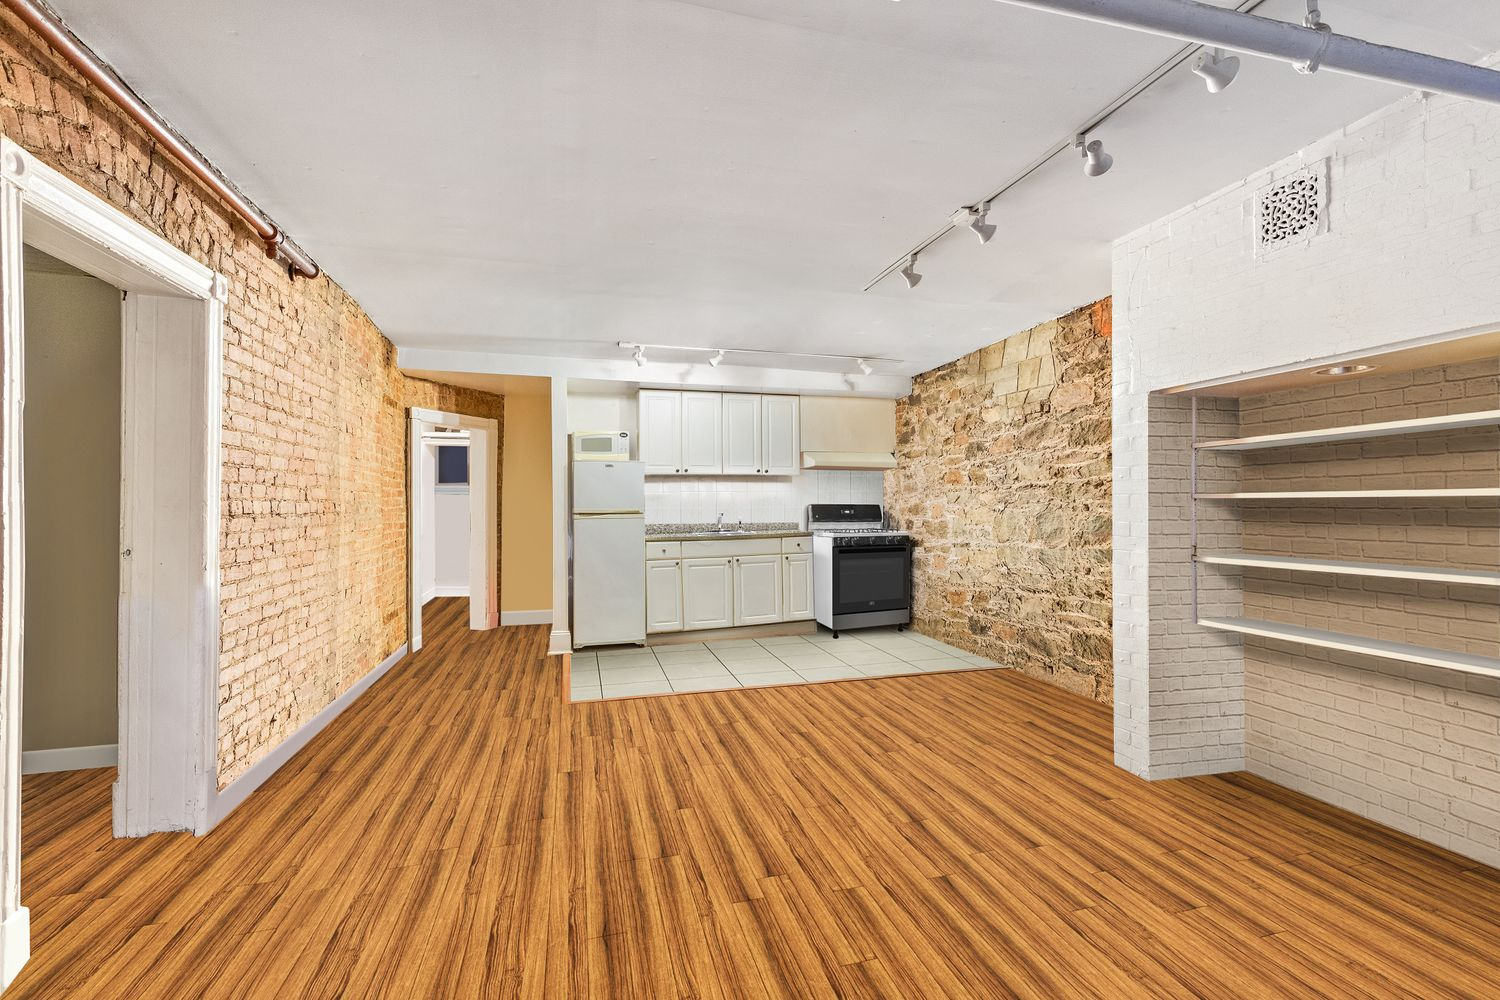 garden level with exposed brick walls and a small kitchen